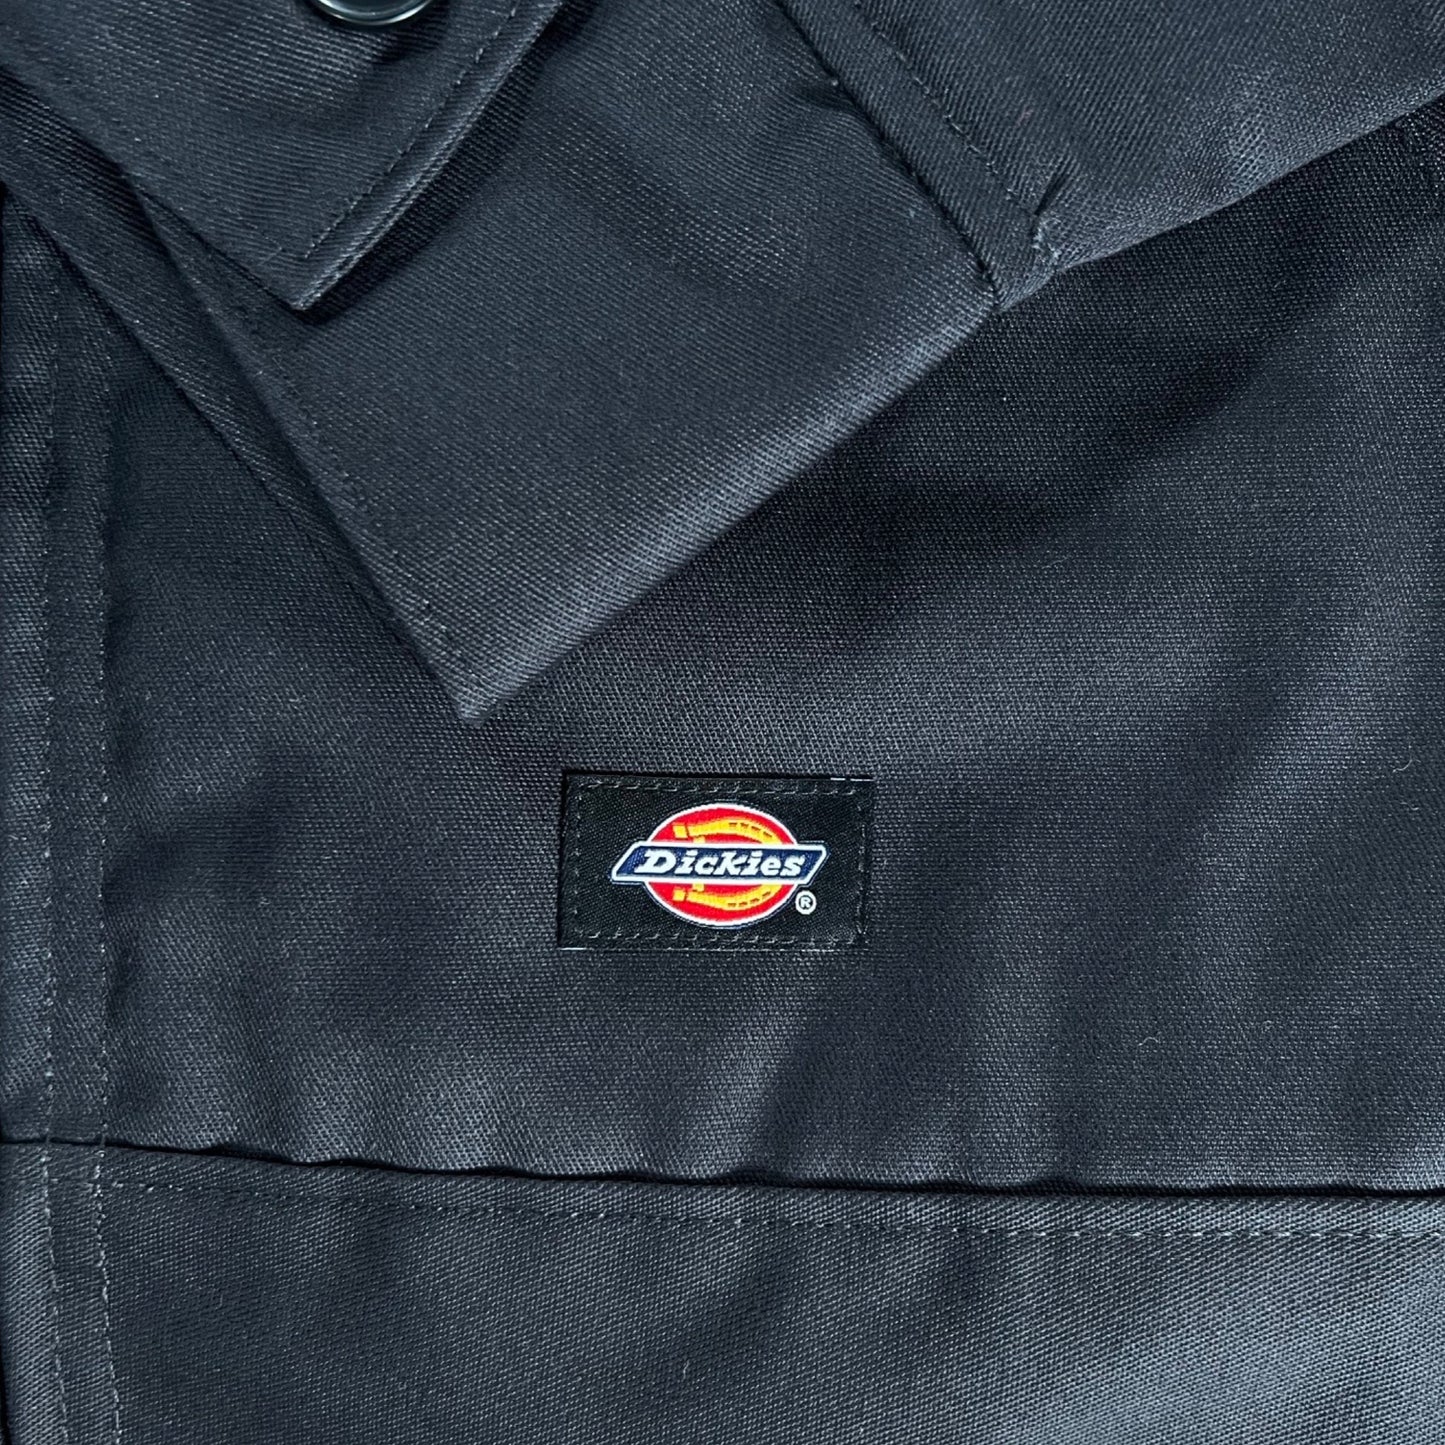 "FOR THE MASSES" DICKIES JACKET